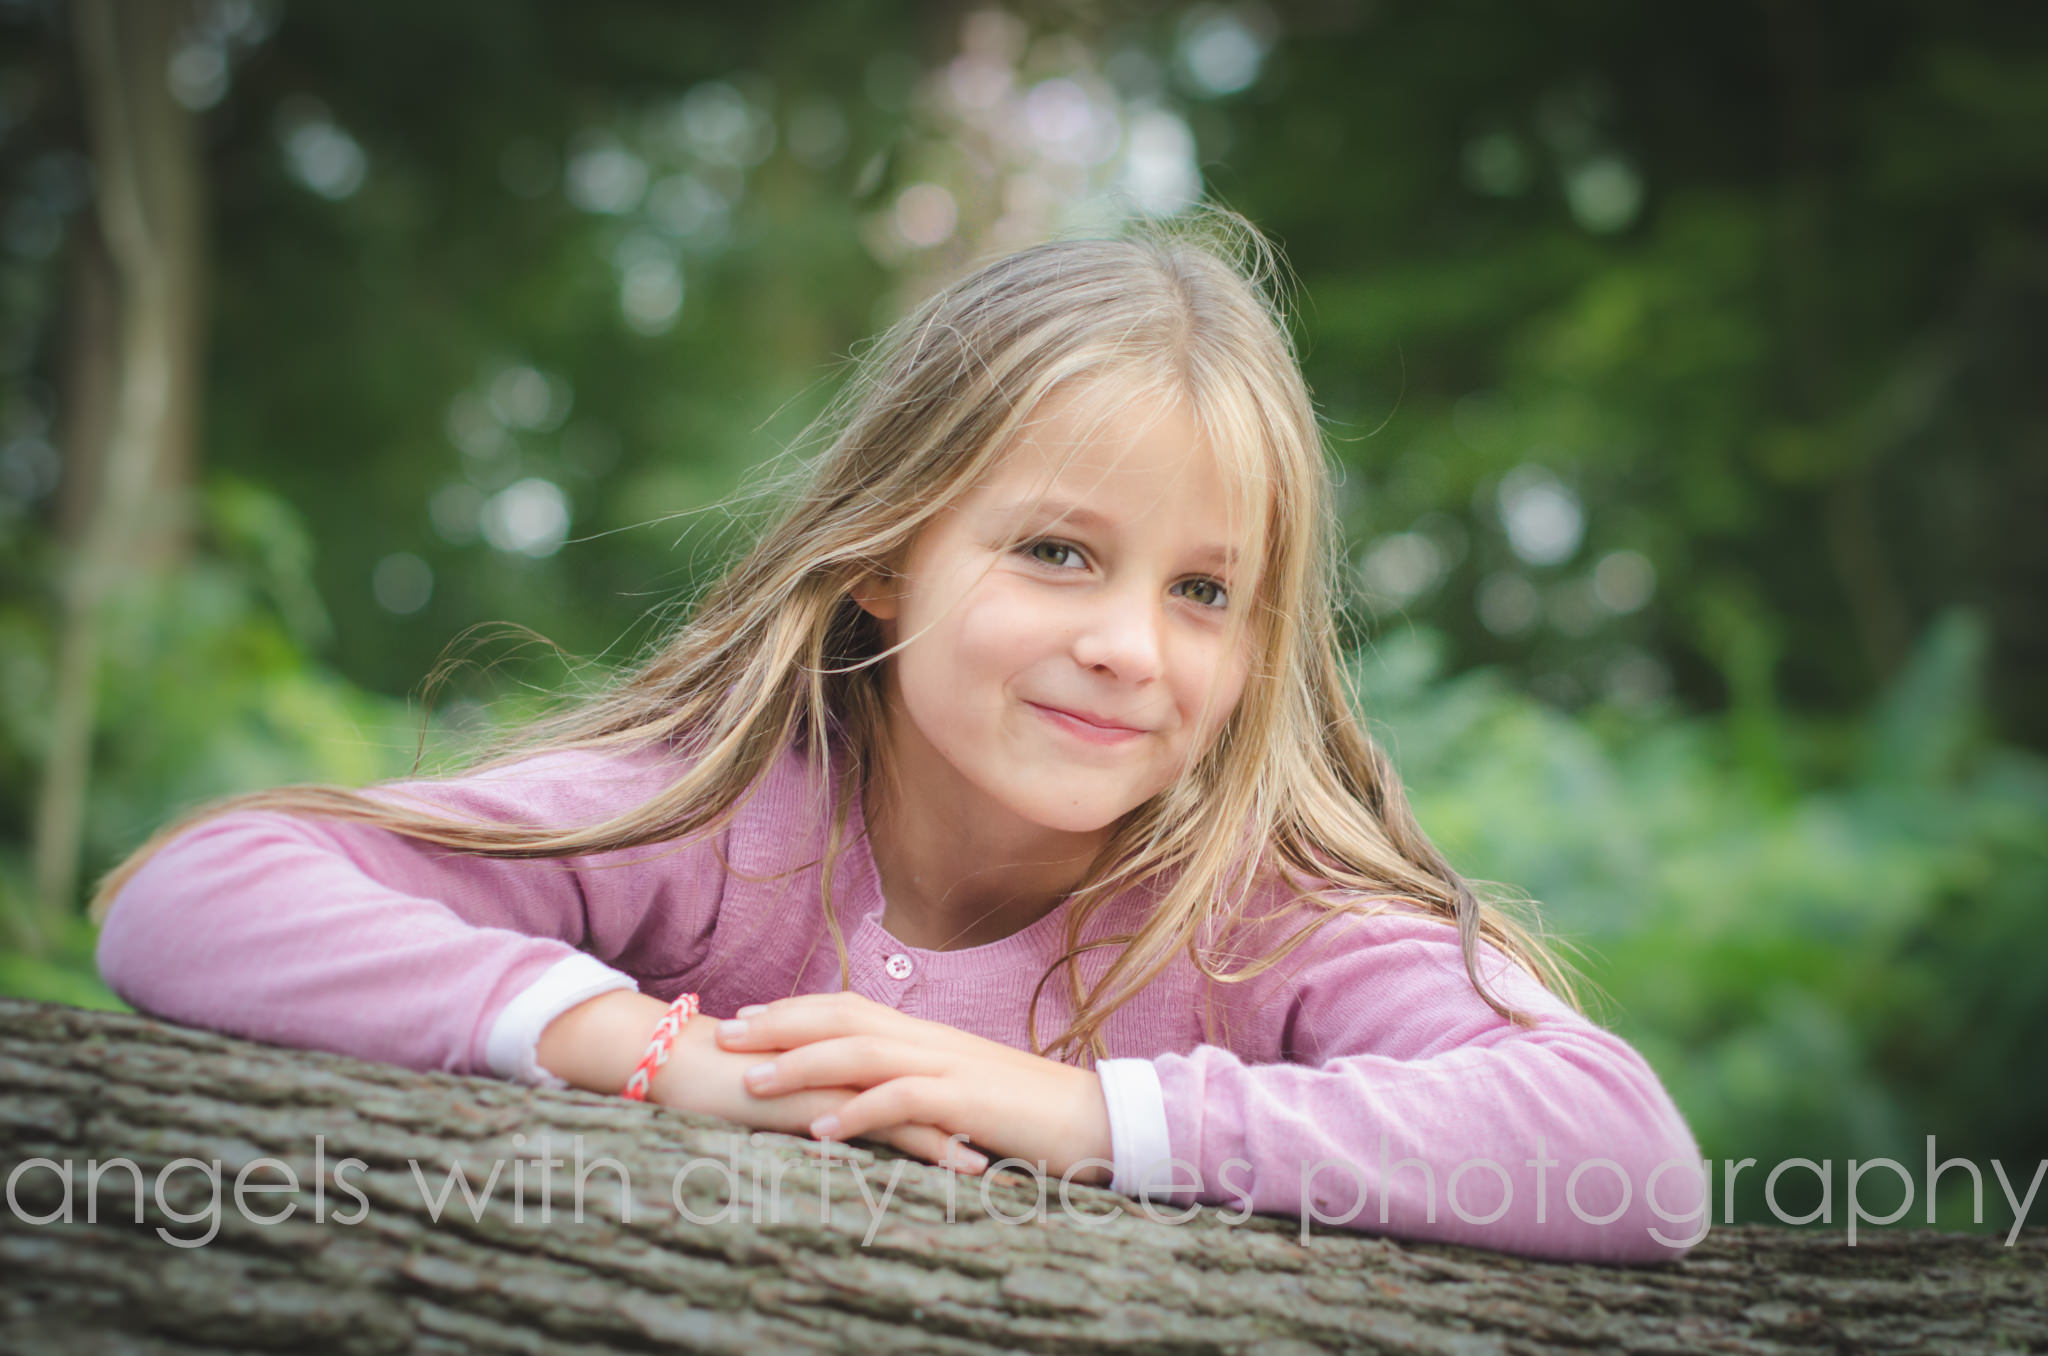 woodland family photo shoot captures a young girl smiling in the woods